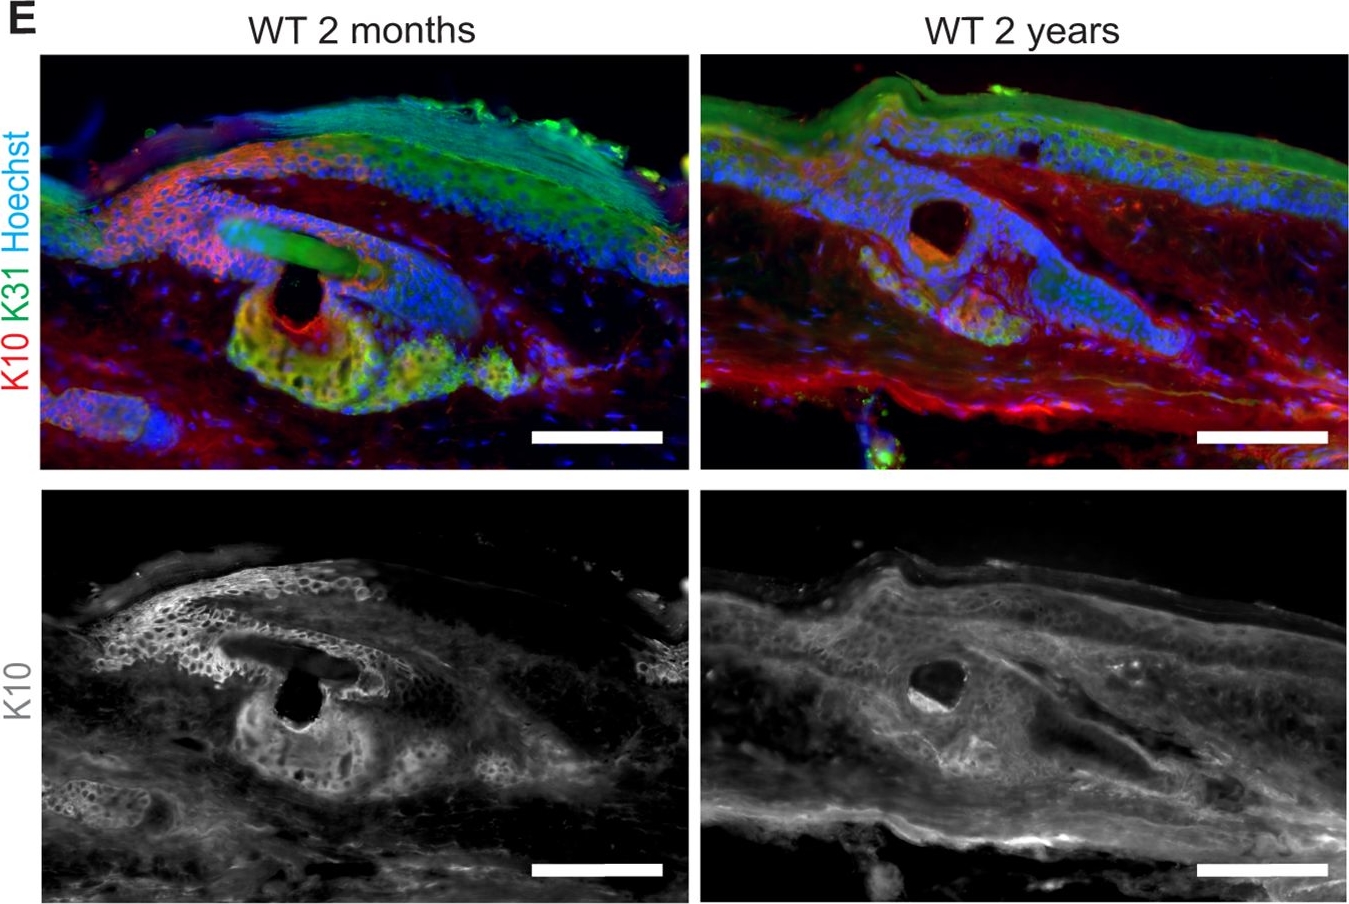 Wild-type and SAMP8 mice show age-dependent changes in distinct stem cell compartments of the interfollicular epidermis.